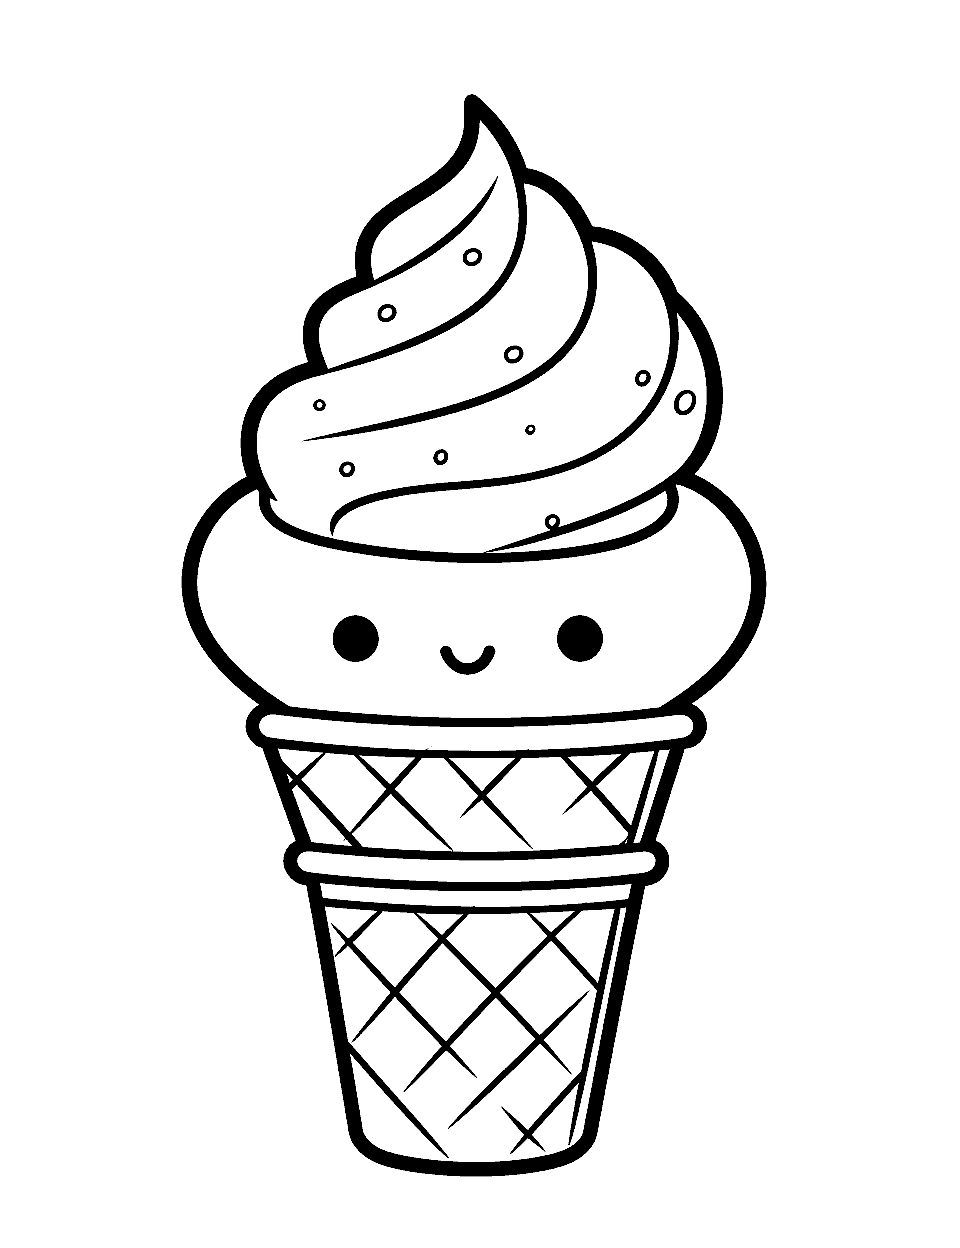 Kawaii Ice Cream Cone Coloring Page - A cute, large-eyed ice cream cone with a cheerful smile.